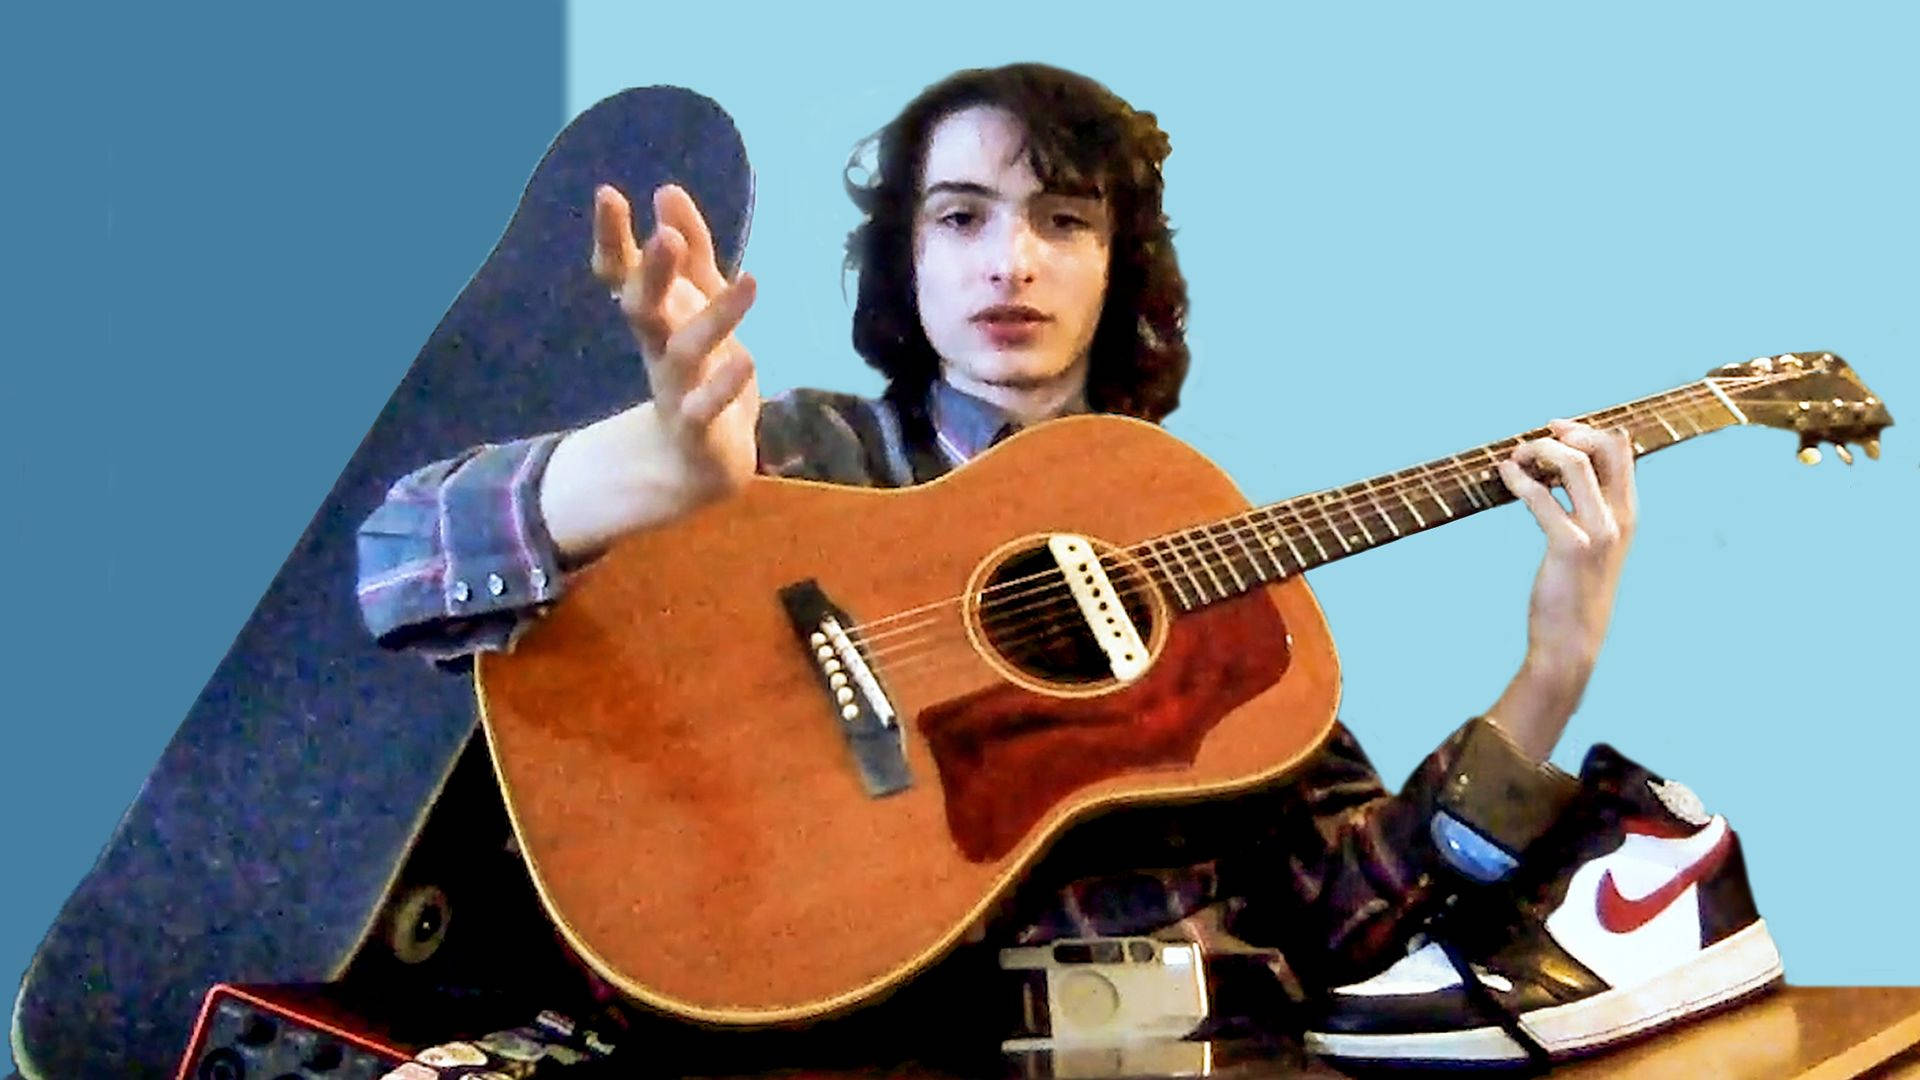 Finn Wolfhard With Guitar Background